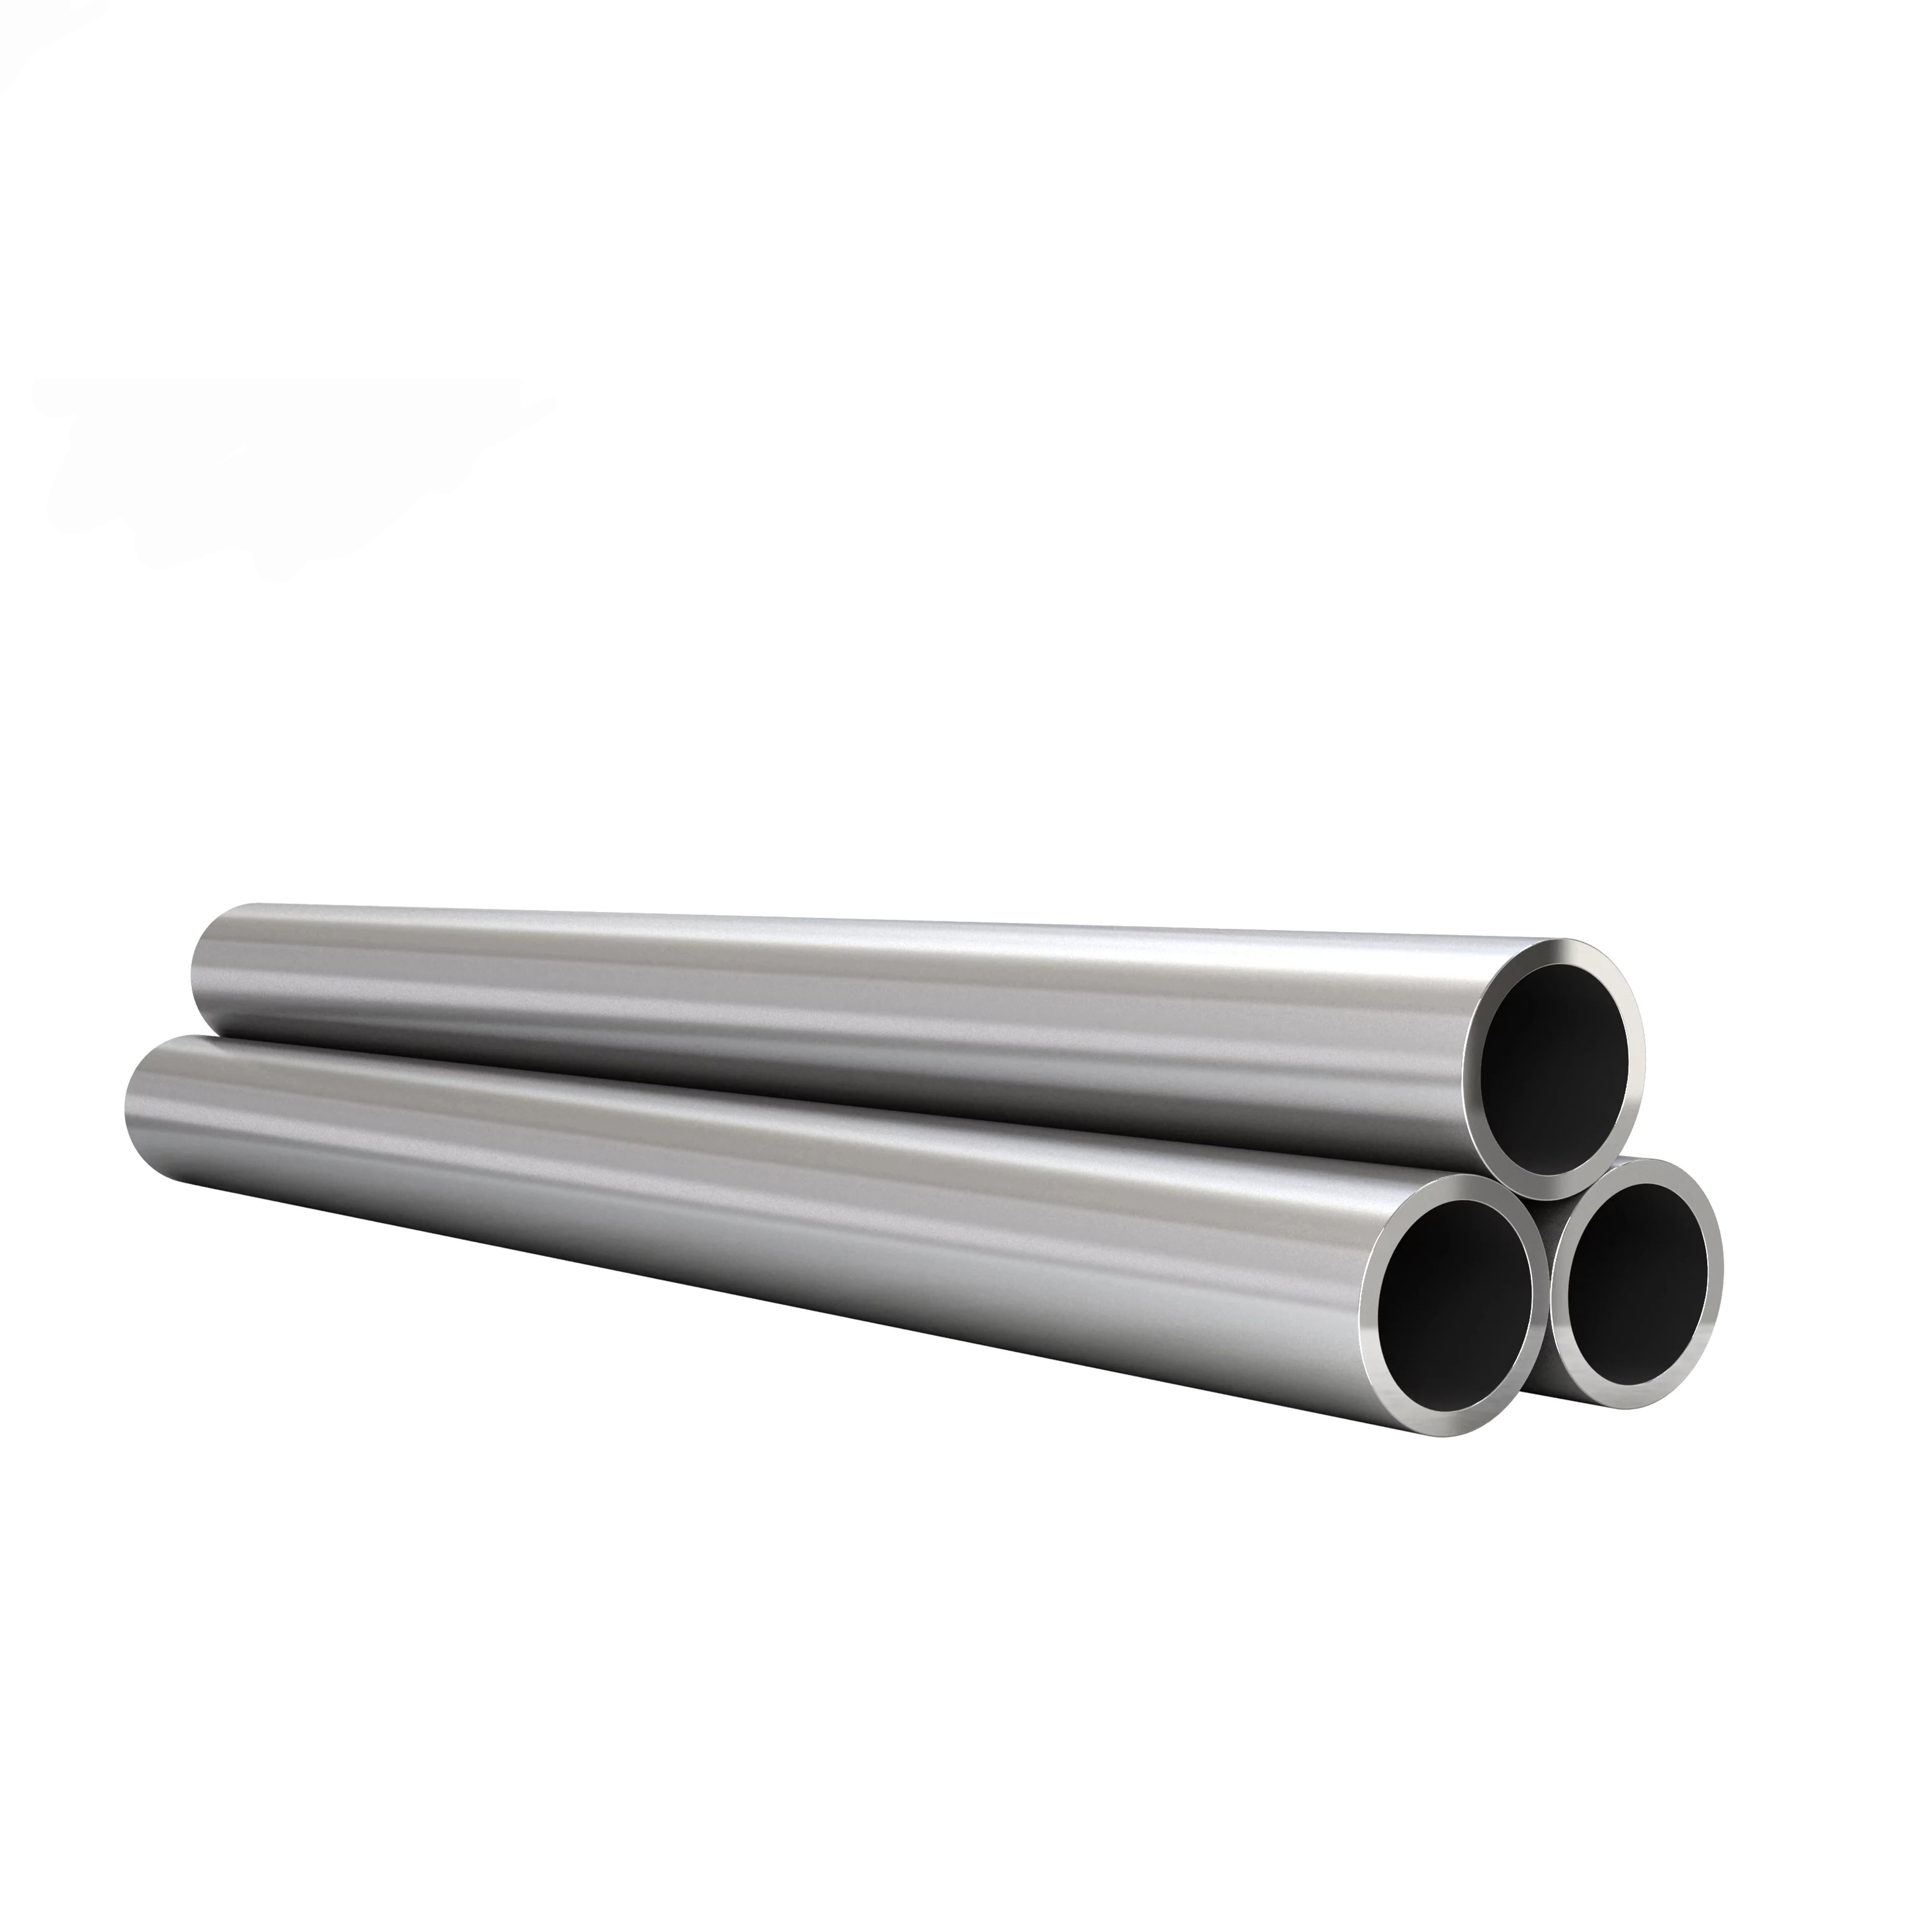 China 6061 T6 Large Diameter Aluminum Hollow Pipes Tubes Anodized Round 20mm 30mm wholesale